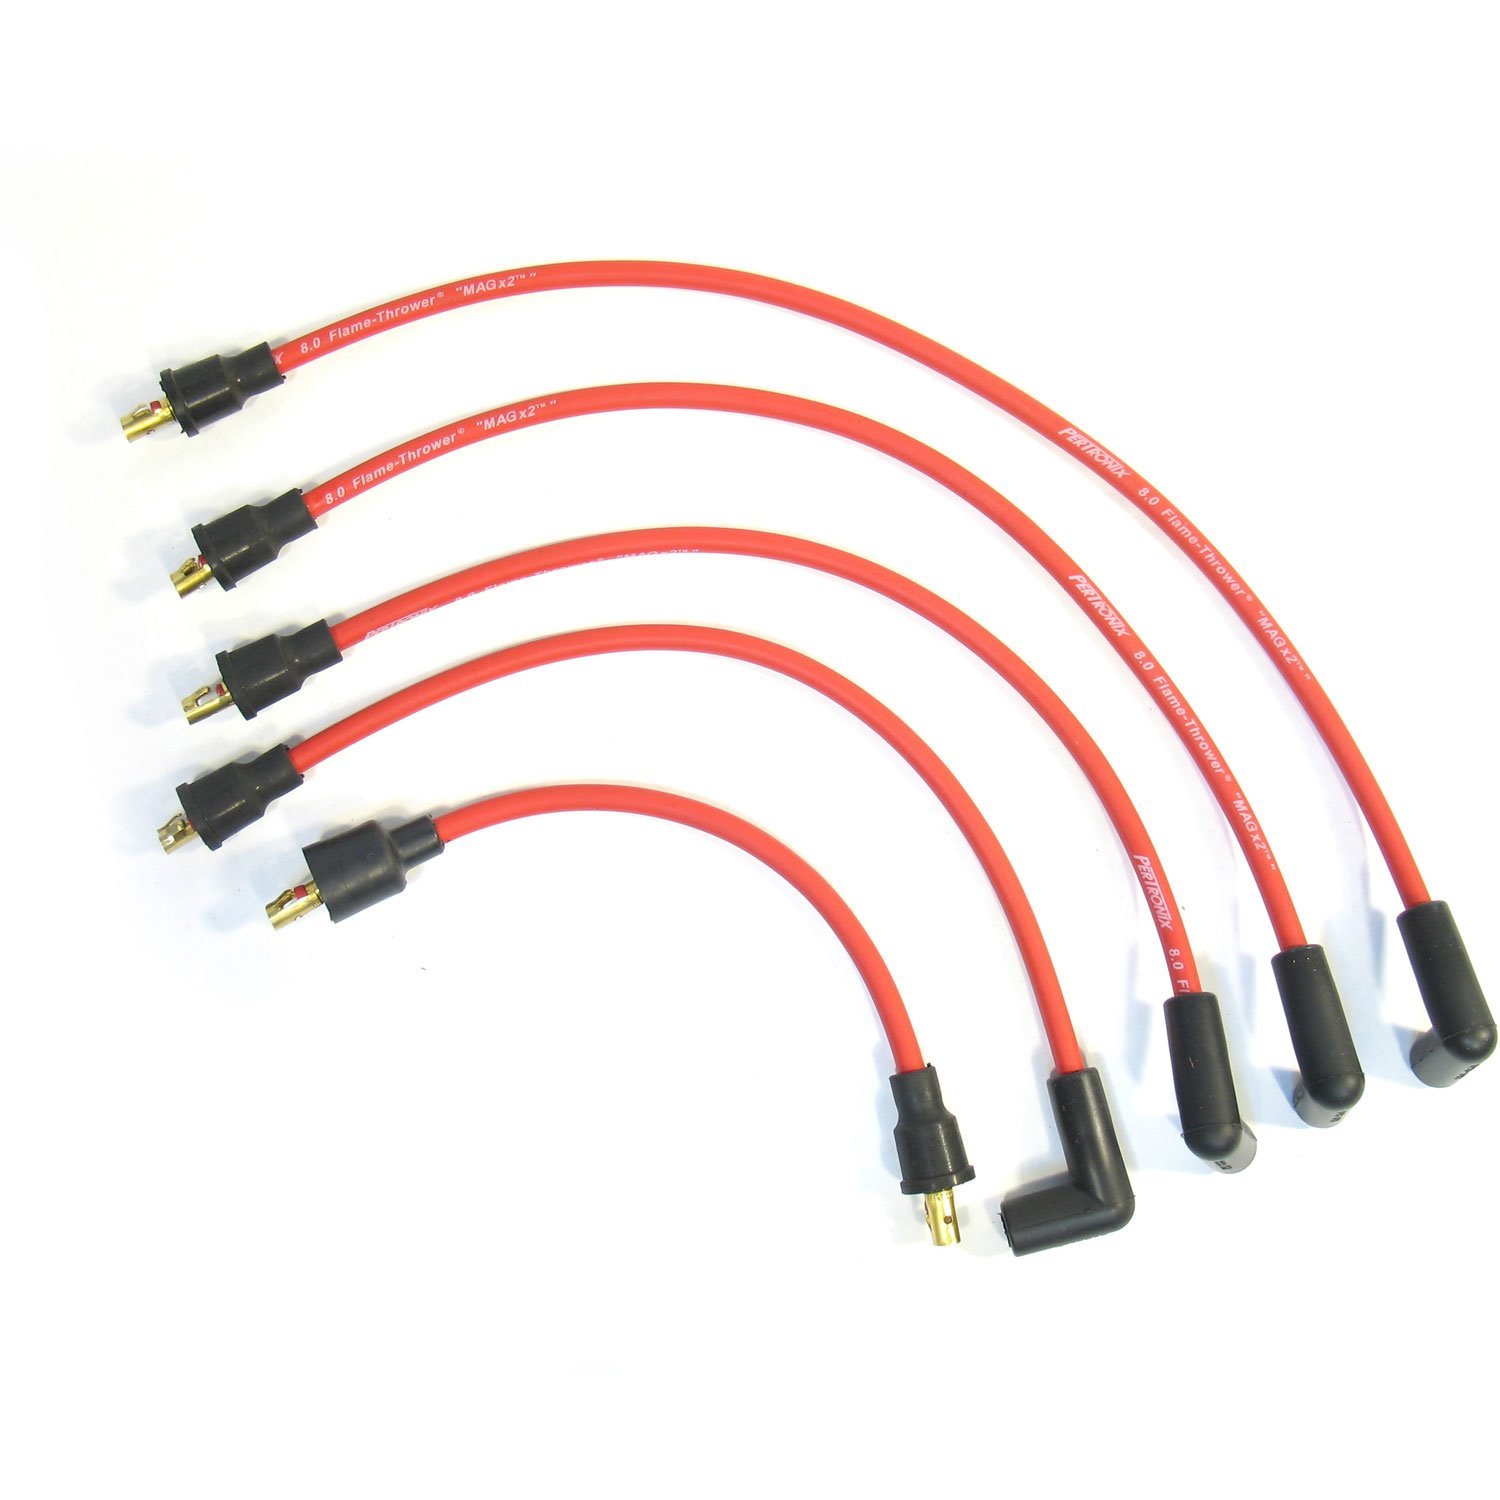 PerTronix 804412 Flame-Thrower Spark Plug Wires 4 cyl